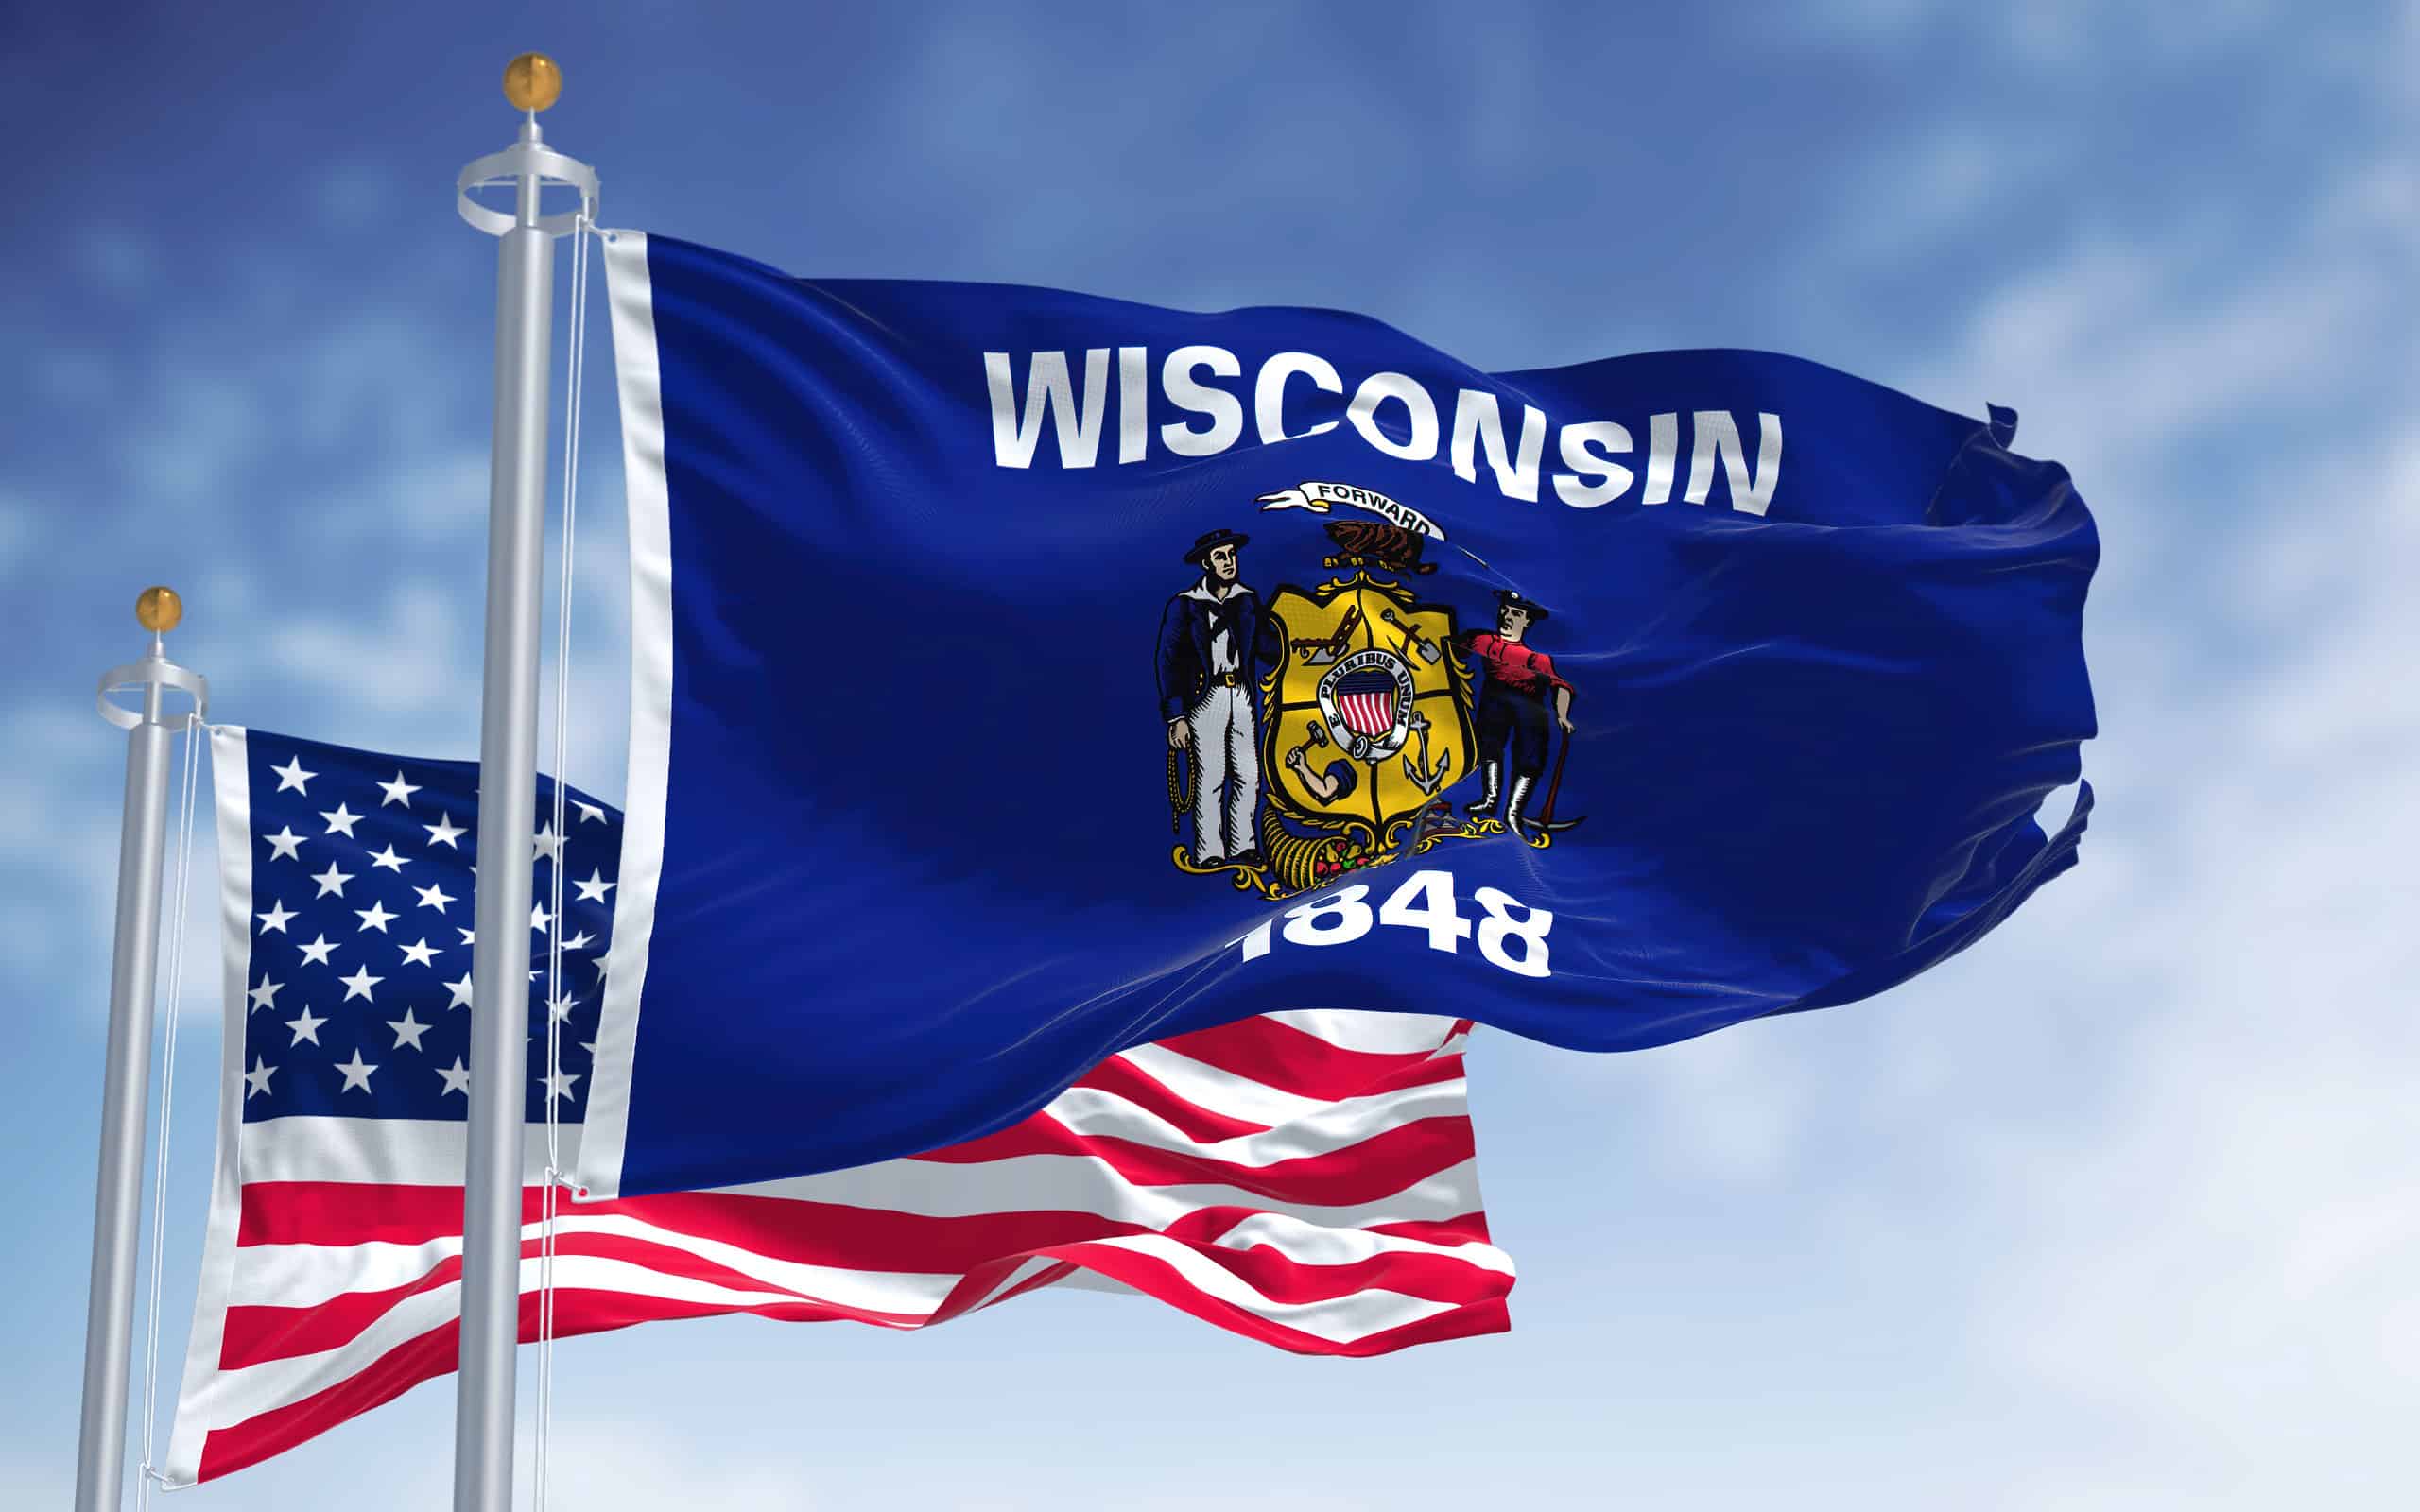 The Wisconsin state flag waving along with the national flag of the United States of America